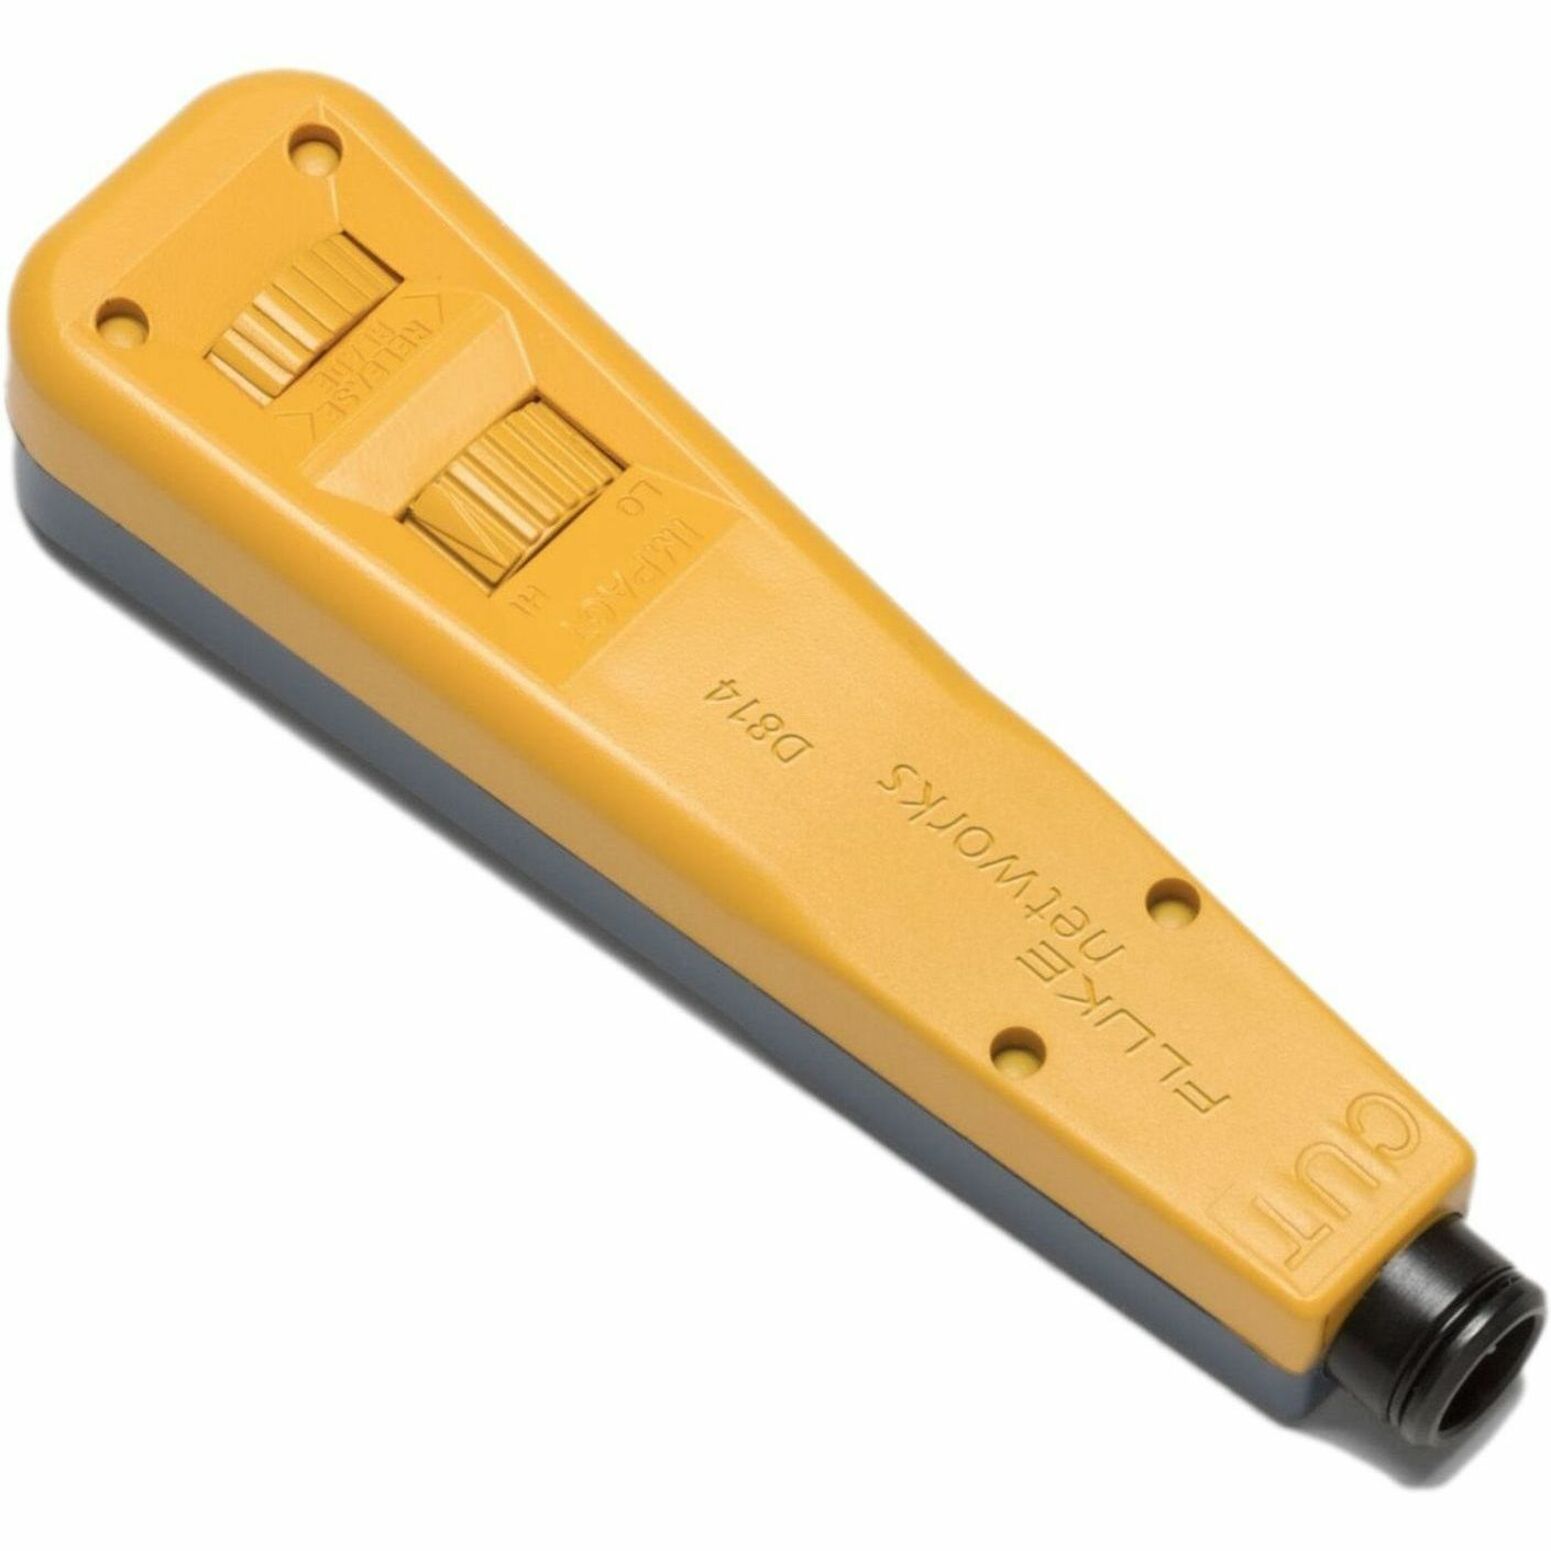 Fluke Networks D814 Punch Down Tool - With EverSharp 66/110 Blades and Free Blade (10055501)